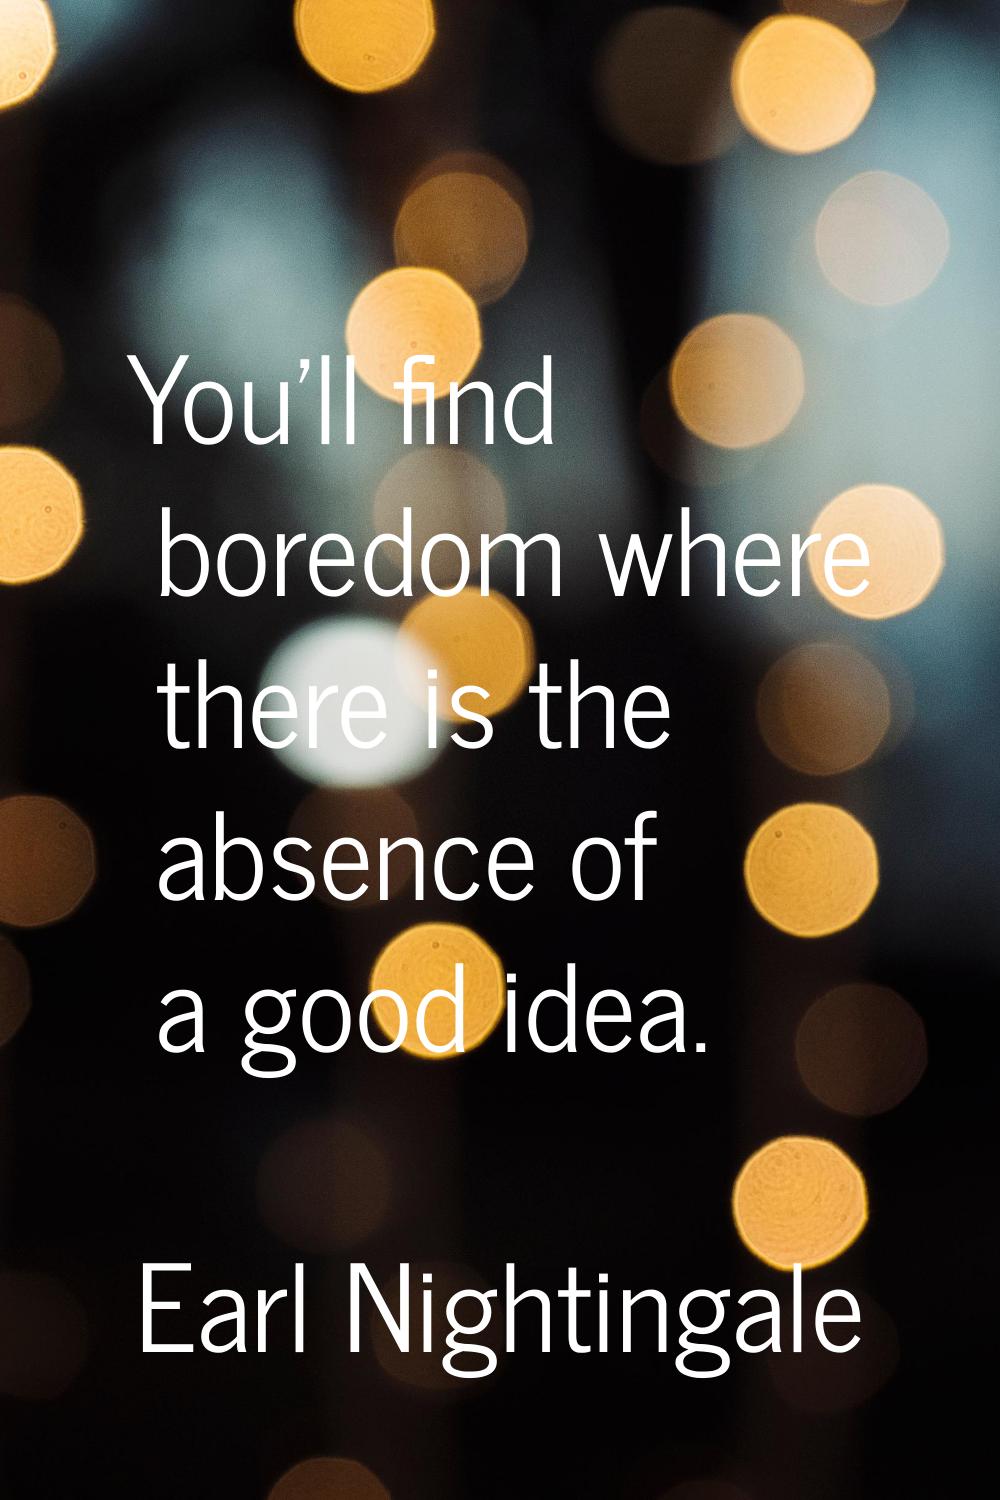 You'll find boredom where there is the absence of a good idea.